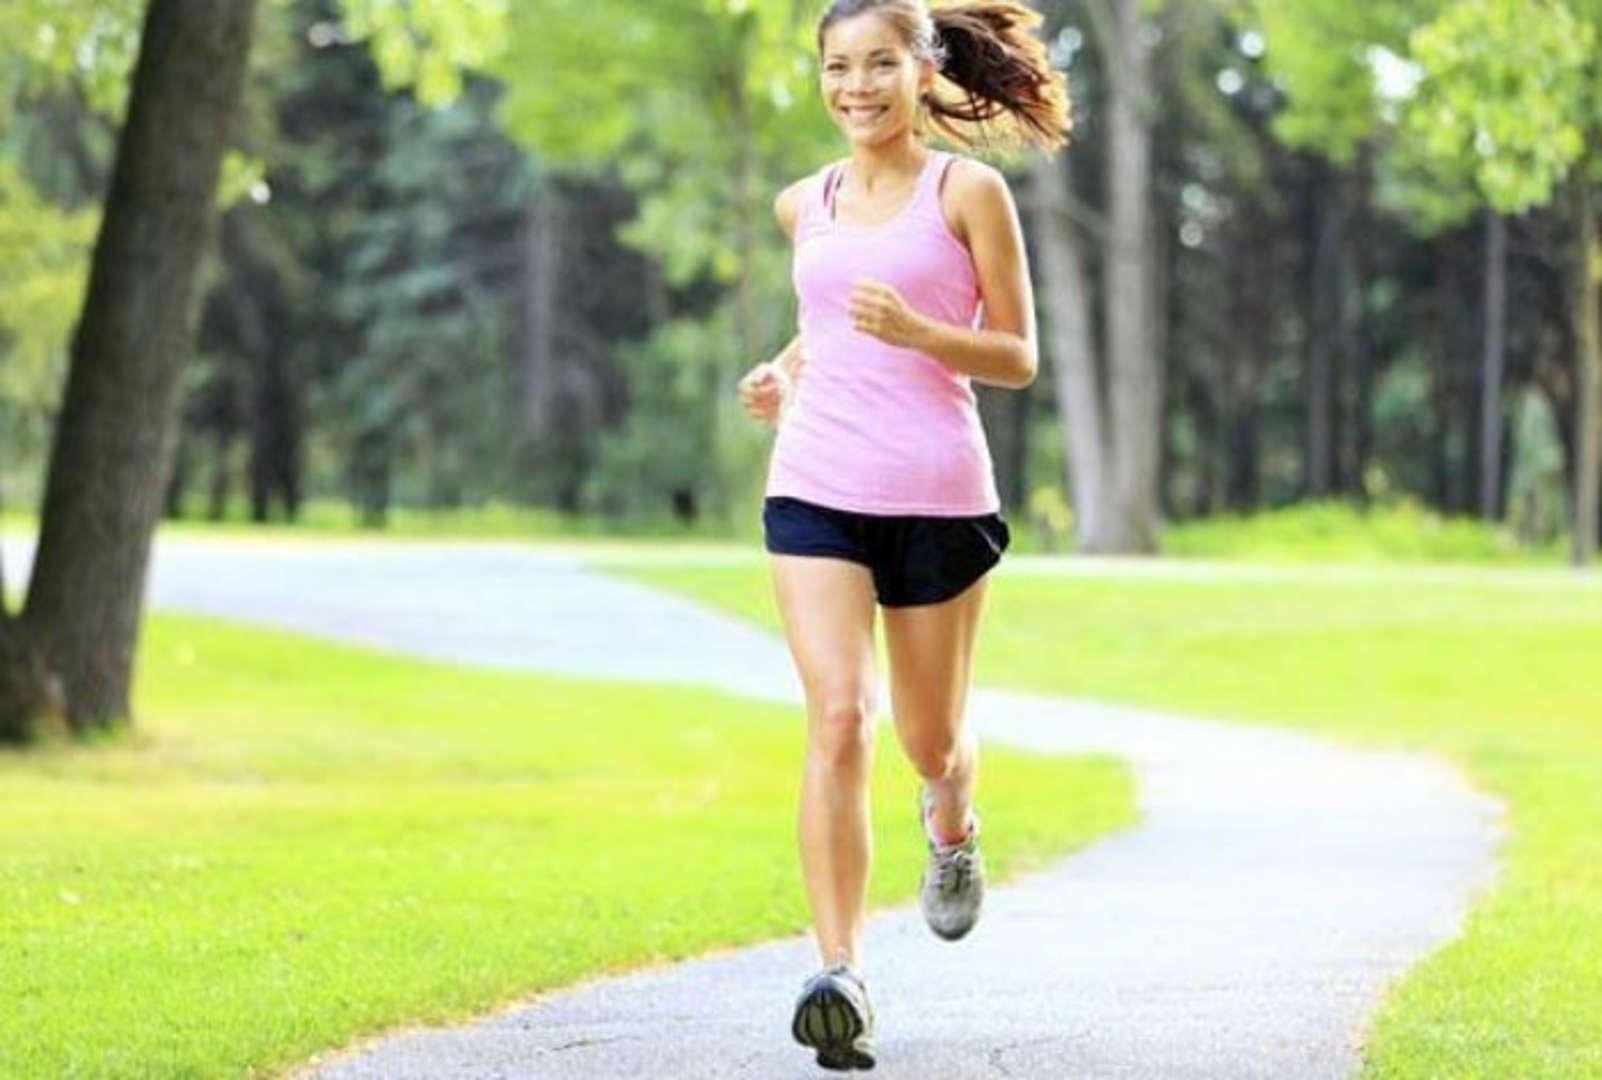 How many steps per day required for healthy lifestyle? Find out